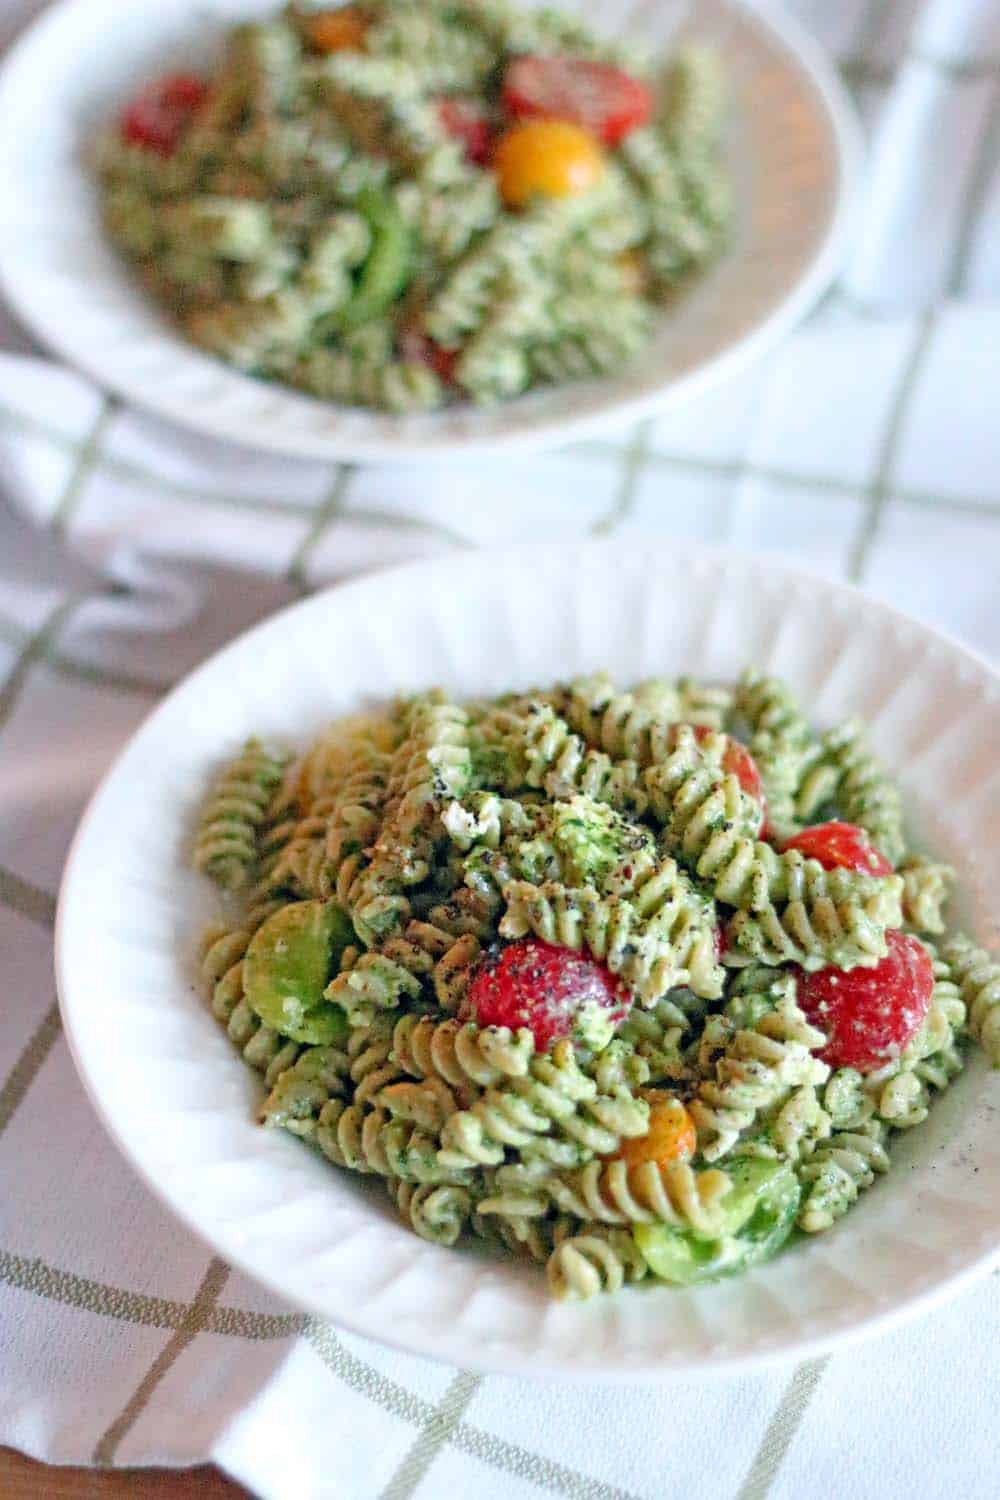 Four Ingredient Pesto Pasta Salad | All you need to make this healthy, light, and delicious pasta salad is 15 minutes and four ingredients! Great for a picnic or a summer party.